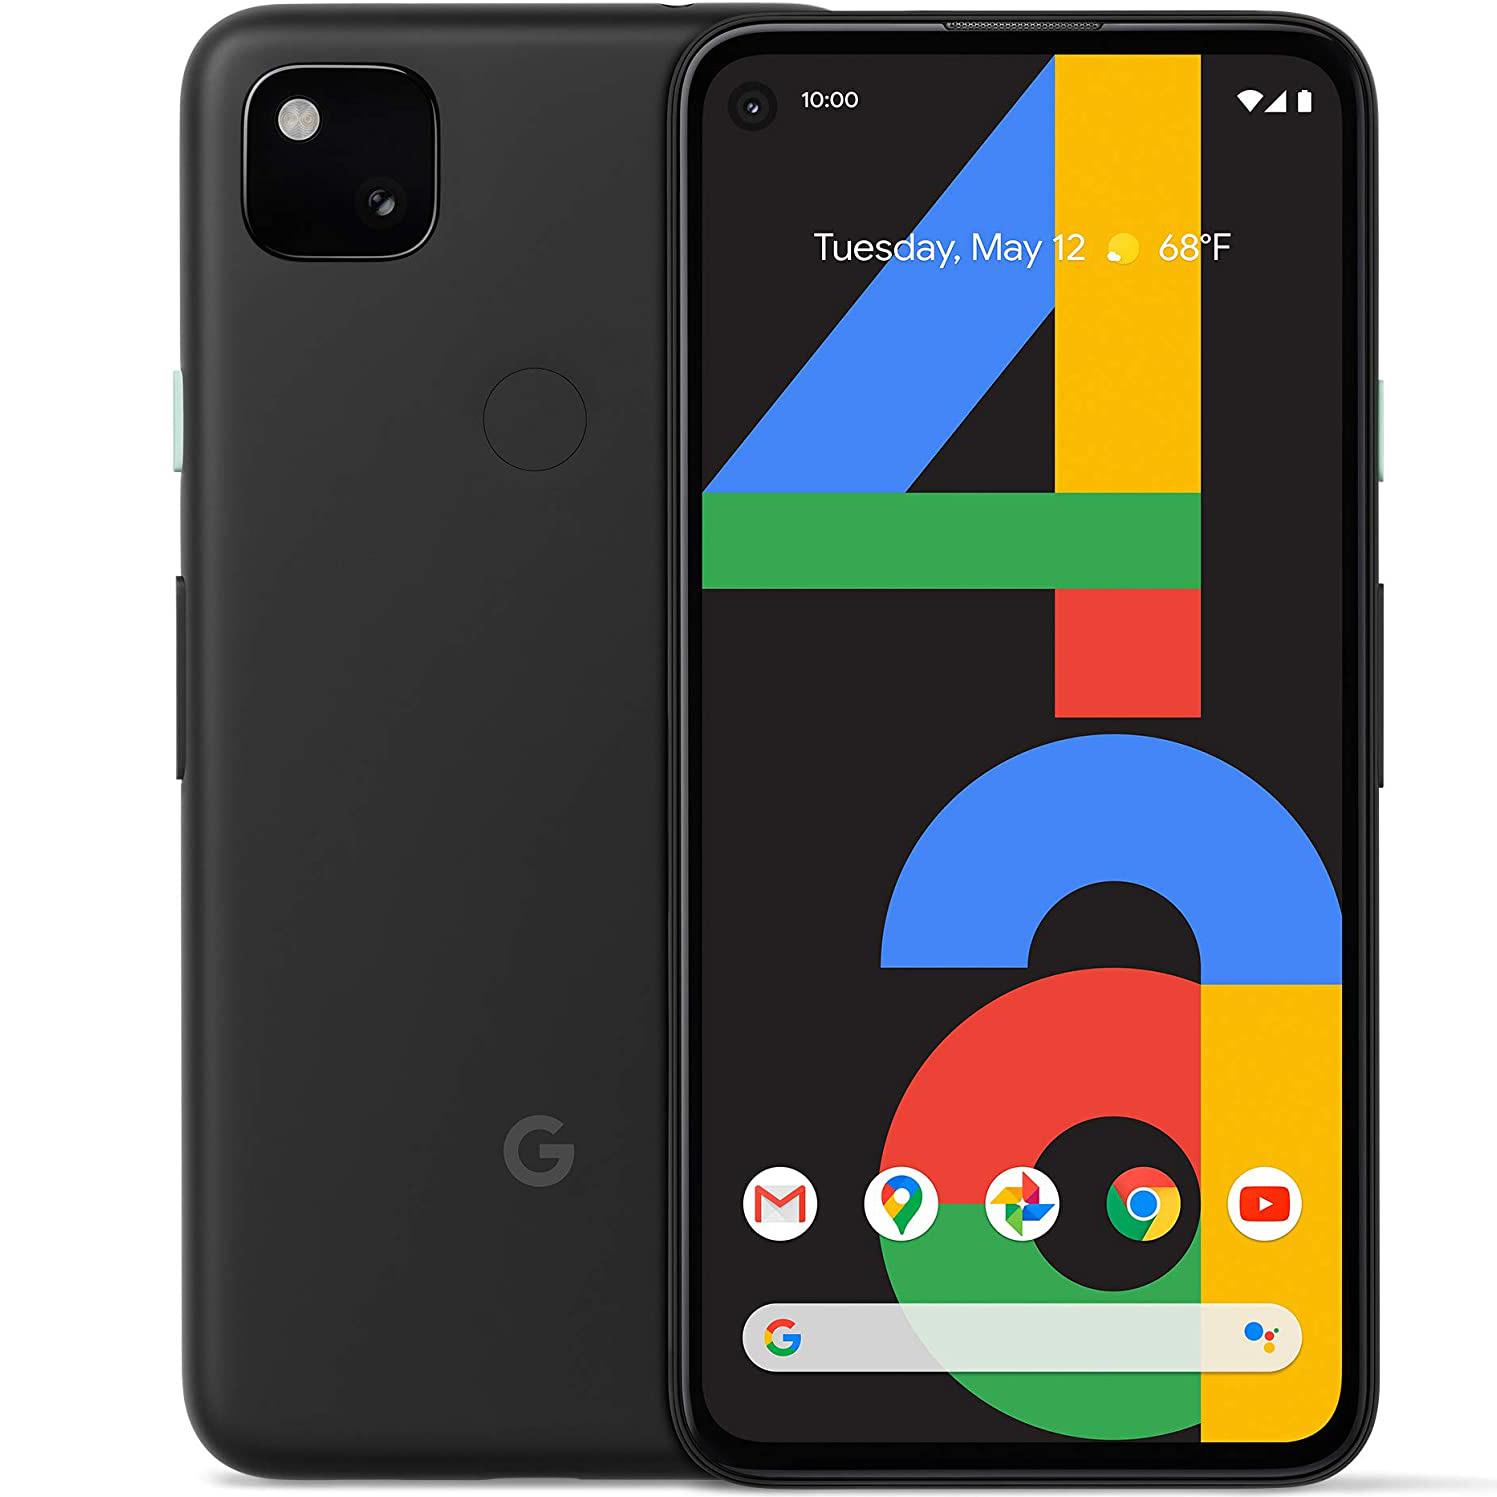 Google Pixel 4a 5G 128GB Unlocked Smartphone for $334 Shipped